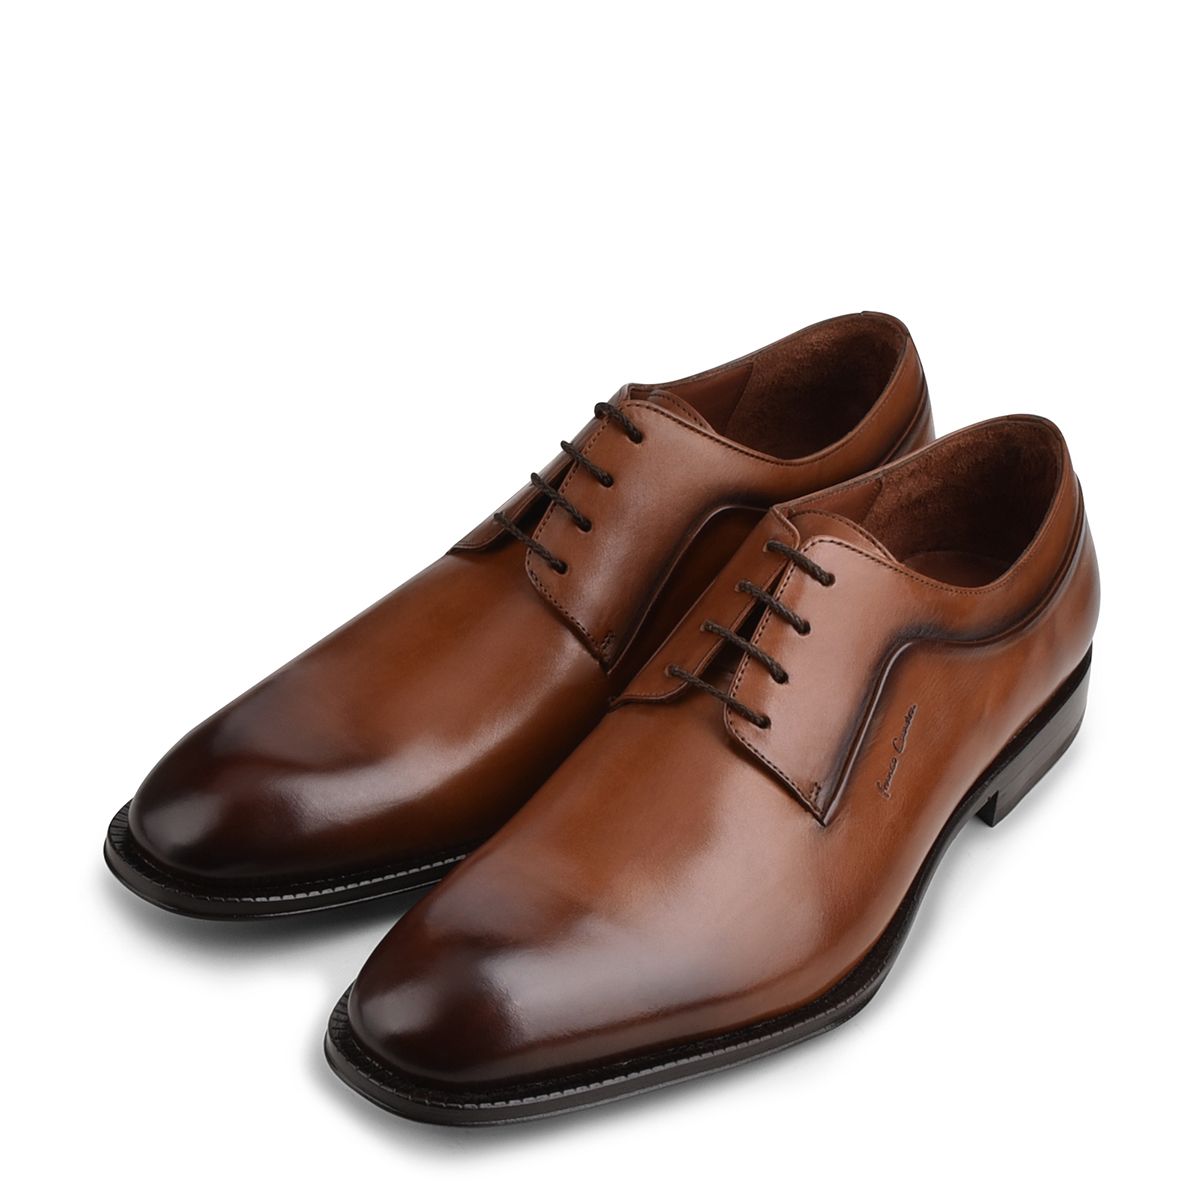 62FBYBY - Cuadra honey classic dress leather plain derby shoes for men-Kuet.us